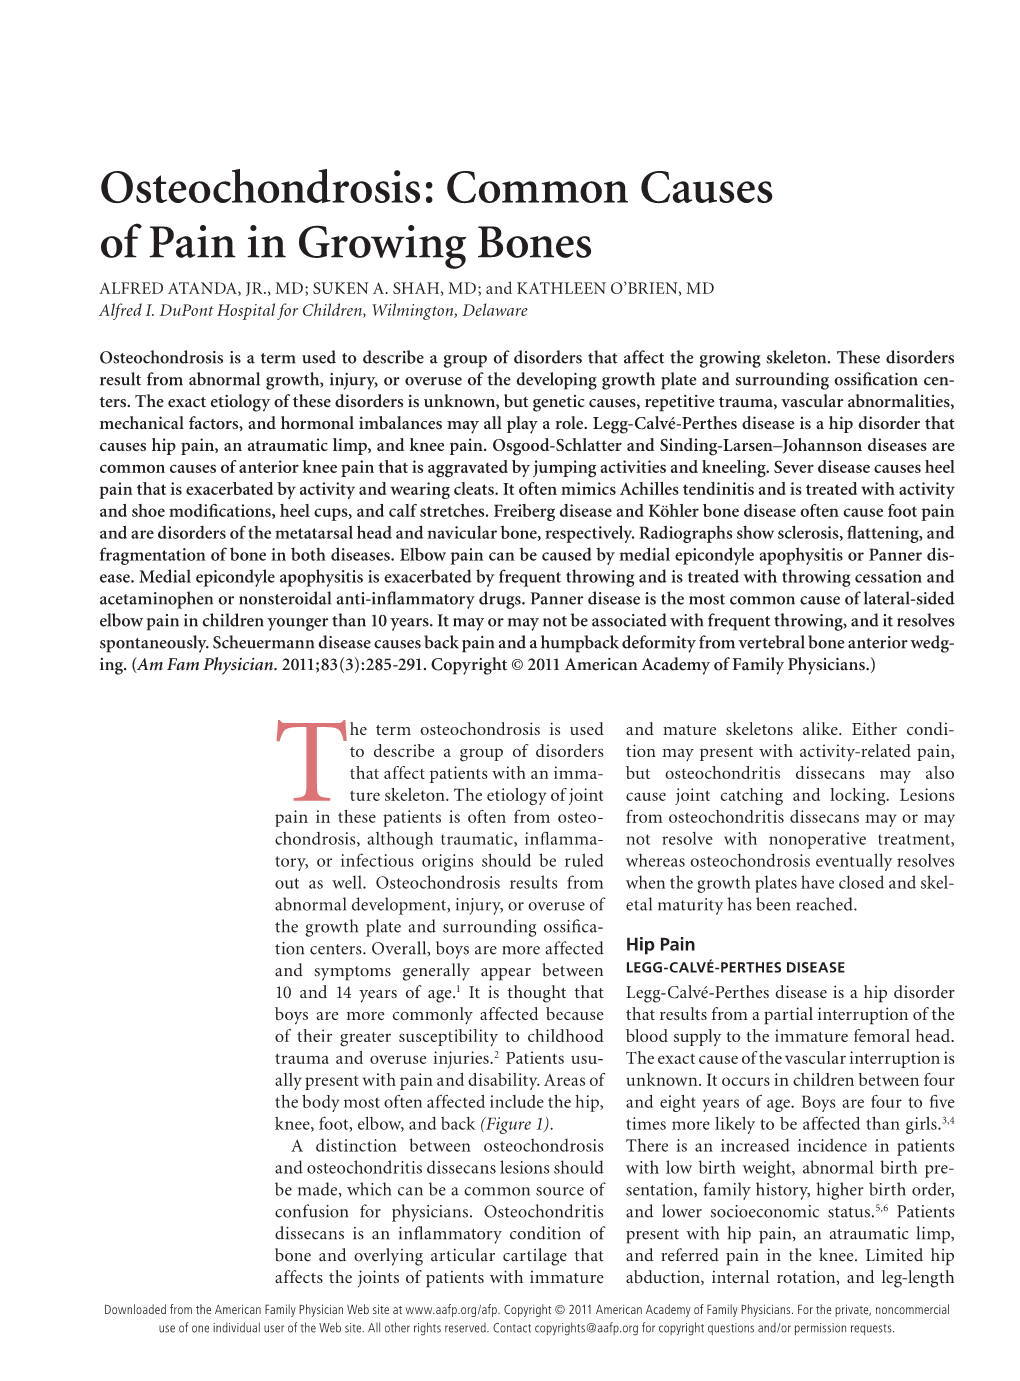 Osteochondrosis: Common Causes of Pain in Growing Bones ALFRED ATANDA, JR., MD; SUKEN A